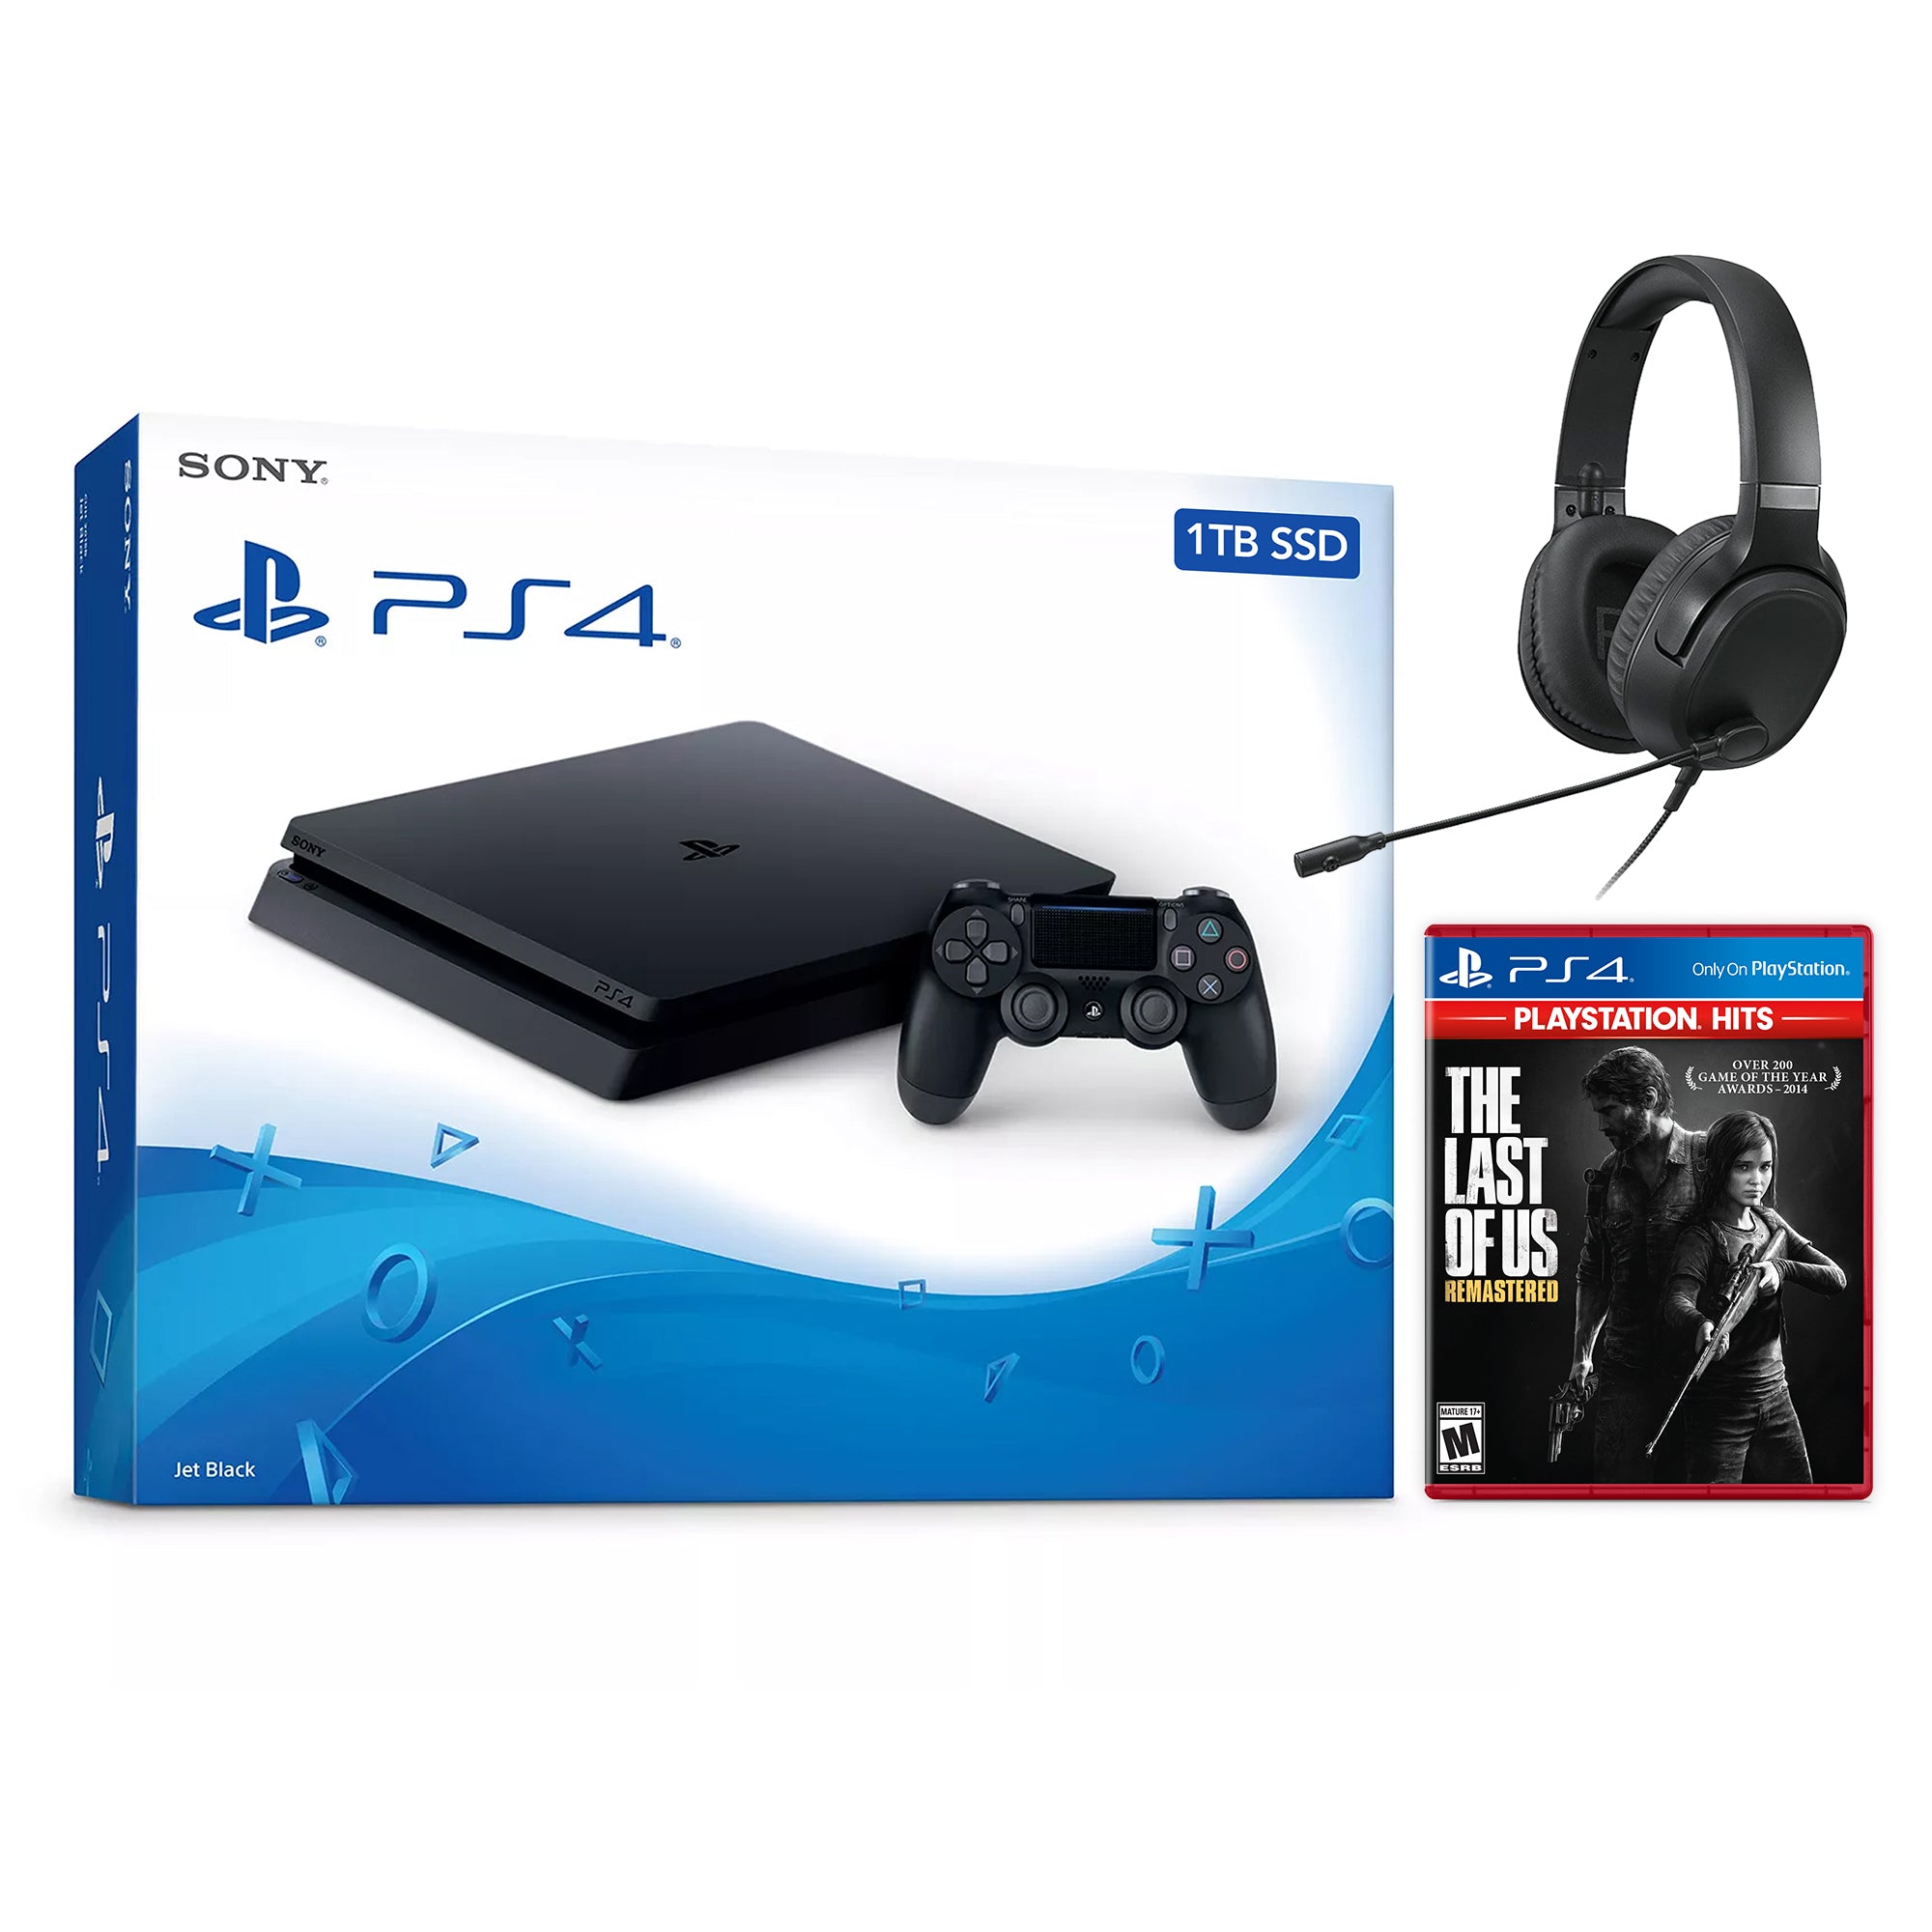 Sony PlayStation 4 Slim Call of Duty Modern Warfare II Bundle Upgrade 1TB SSD PS4 Gaming Console, Jet Black, with Mytrix Chat Headset - Internal Fast Solid State Drive Enhanced PS4 Console